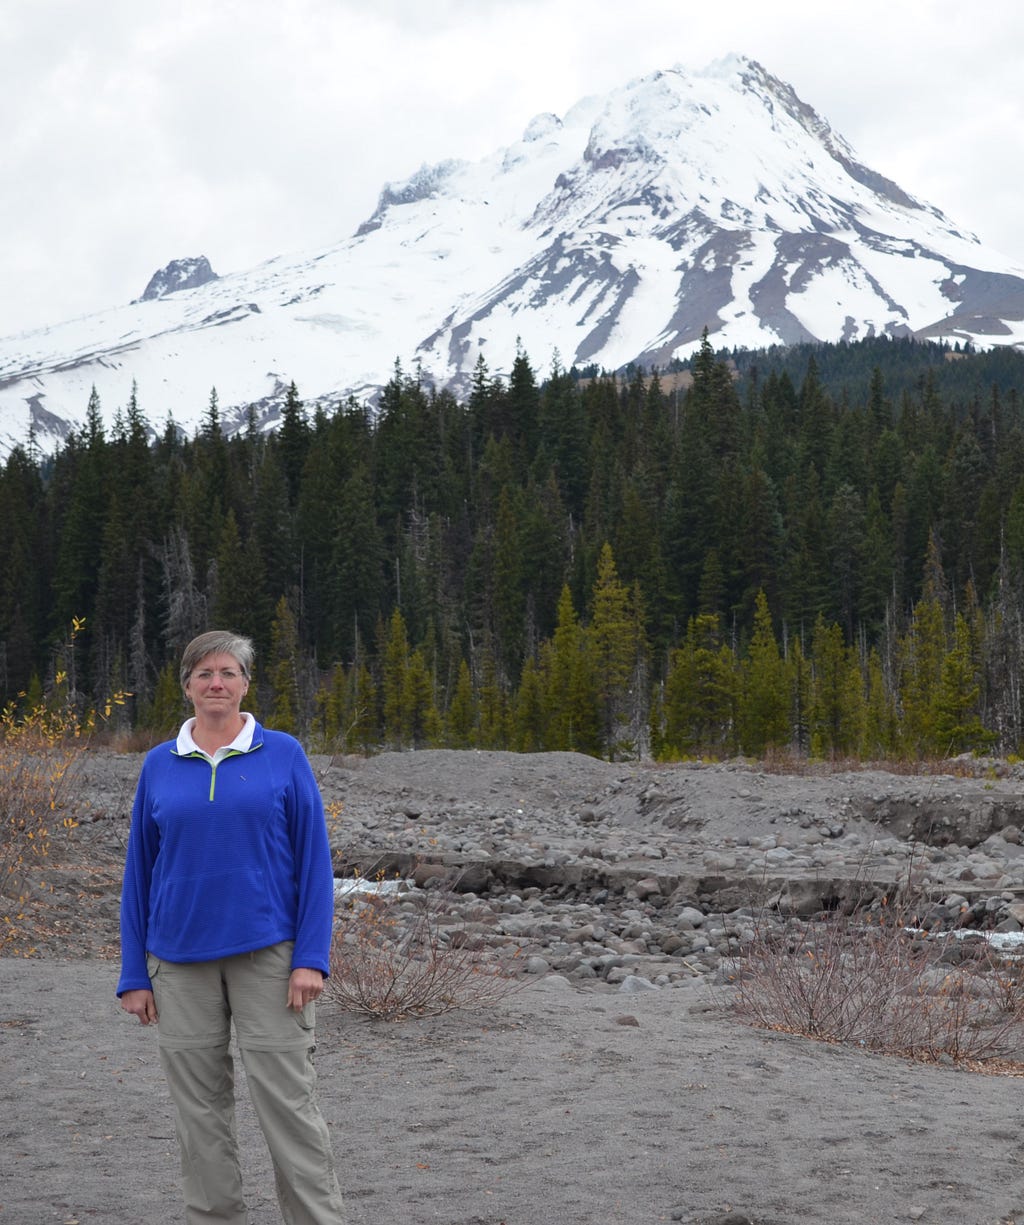 FWS Scholar, Mary Burnham-Curtis, Ph.D. is the Genetics Team Leader and Senior Forensic Scientist at the National Fish and Wildlife Forensic Laboratory, who is enjoying the trails and scenery at Mt. Hood, Oregon.